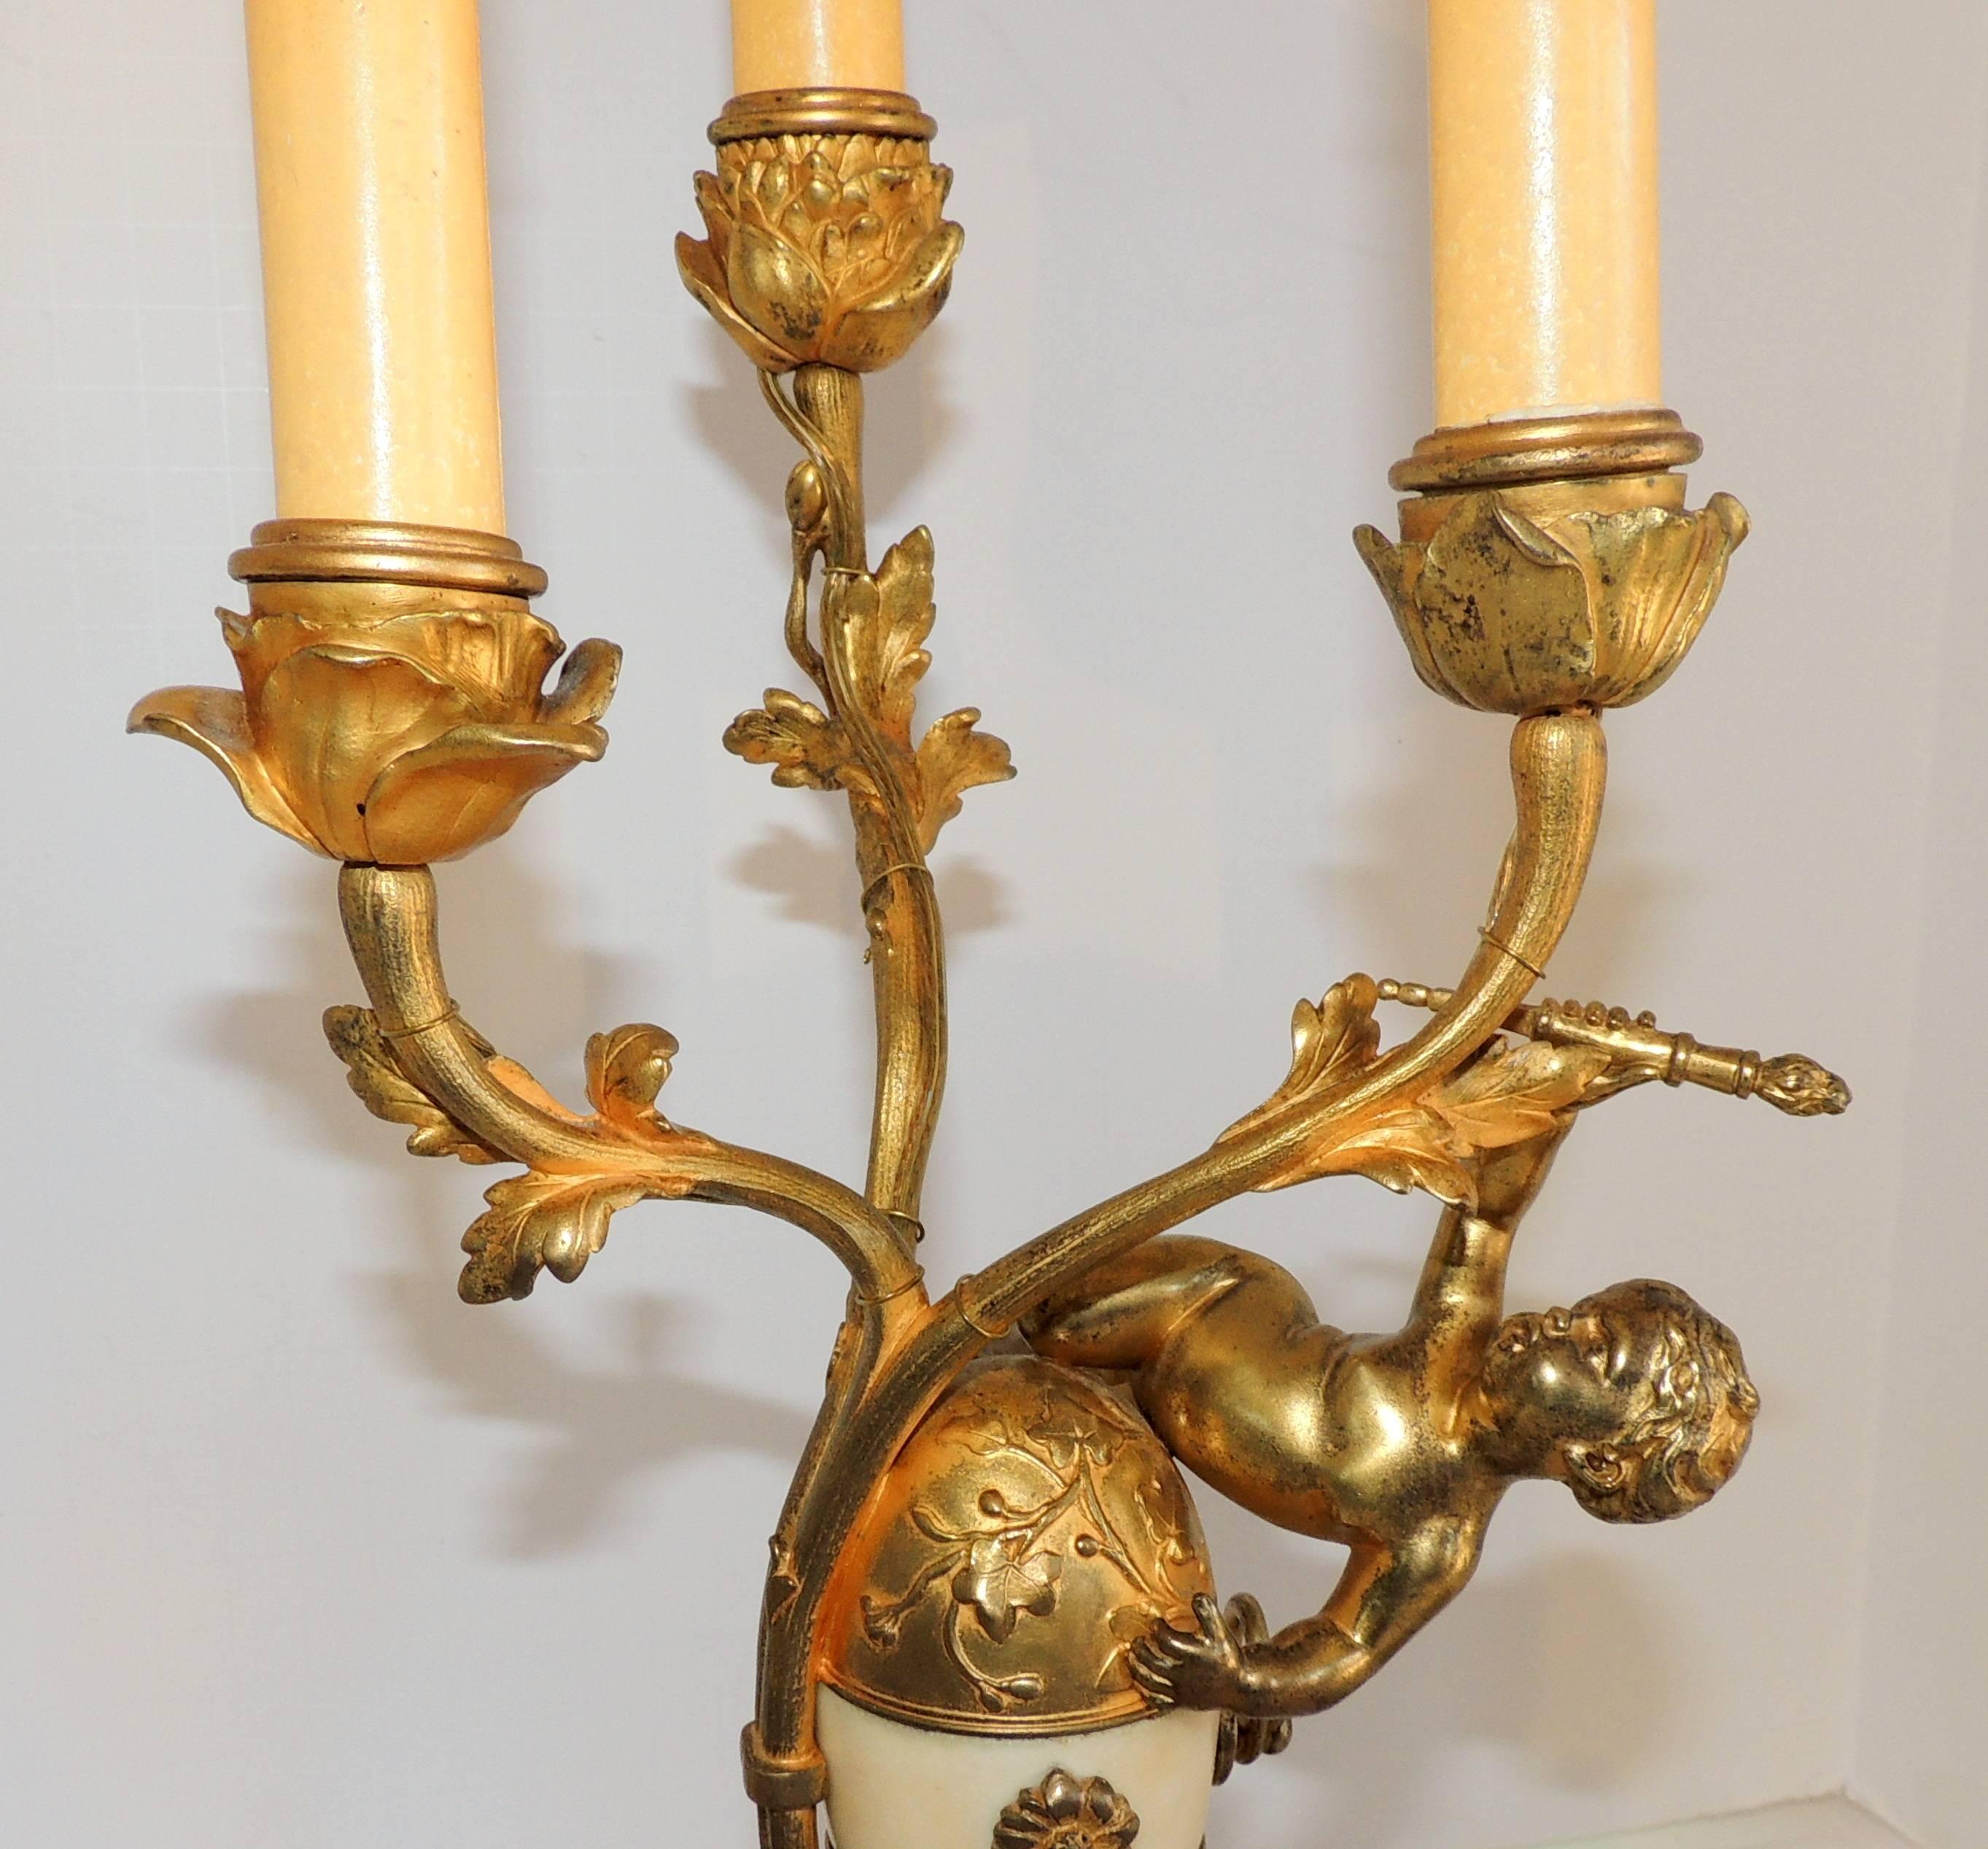 Beautiful French Dore Bronze Marble Cherub Ormolu-Mounted Candelabra Lamps, Pair For Sale 1